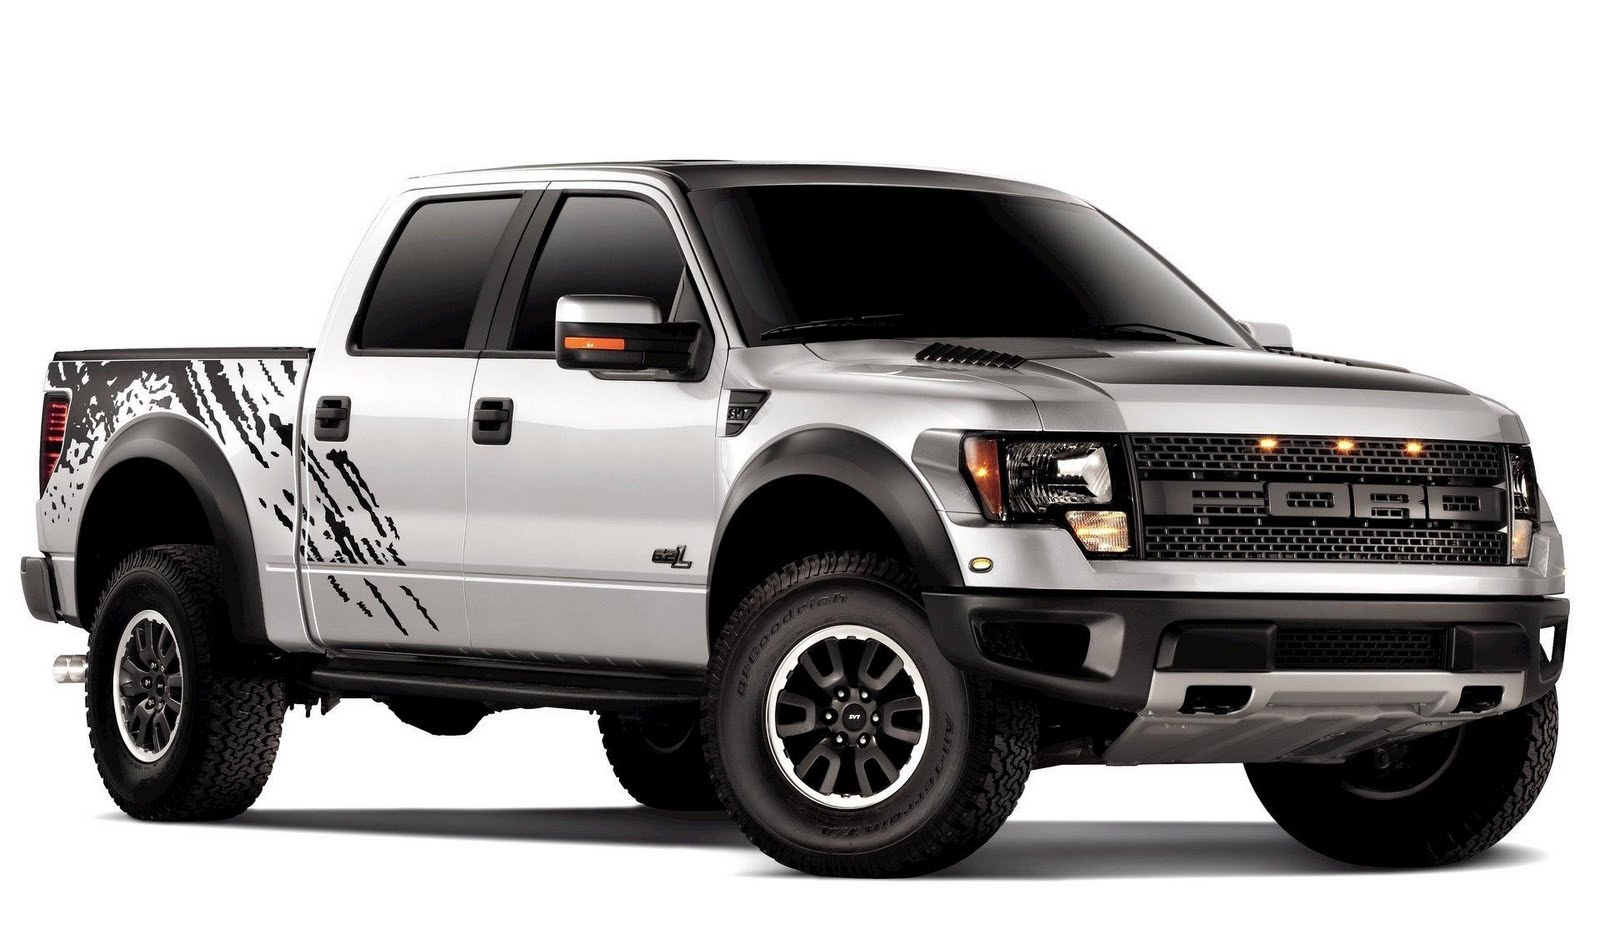 Ford Truck HD Wallpaper Pictures Cool